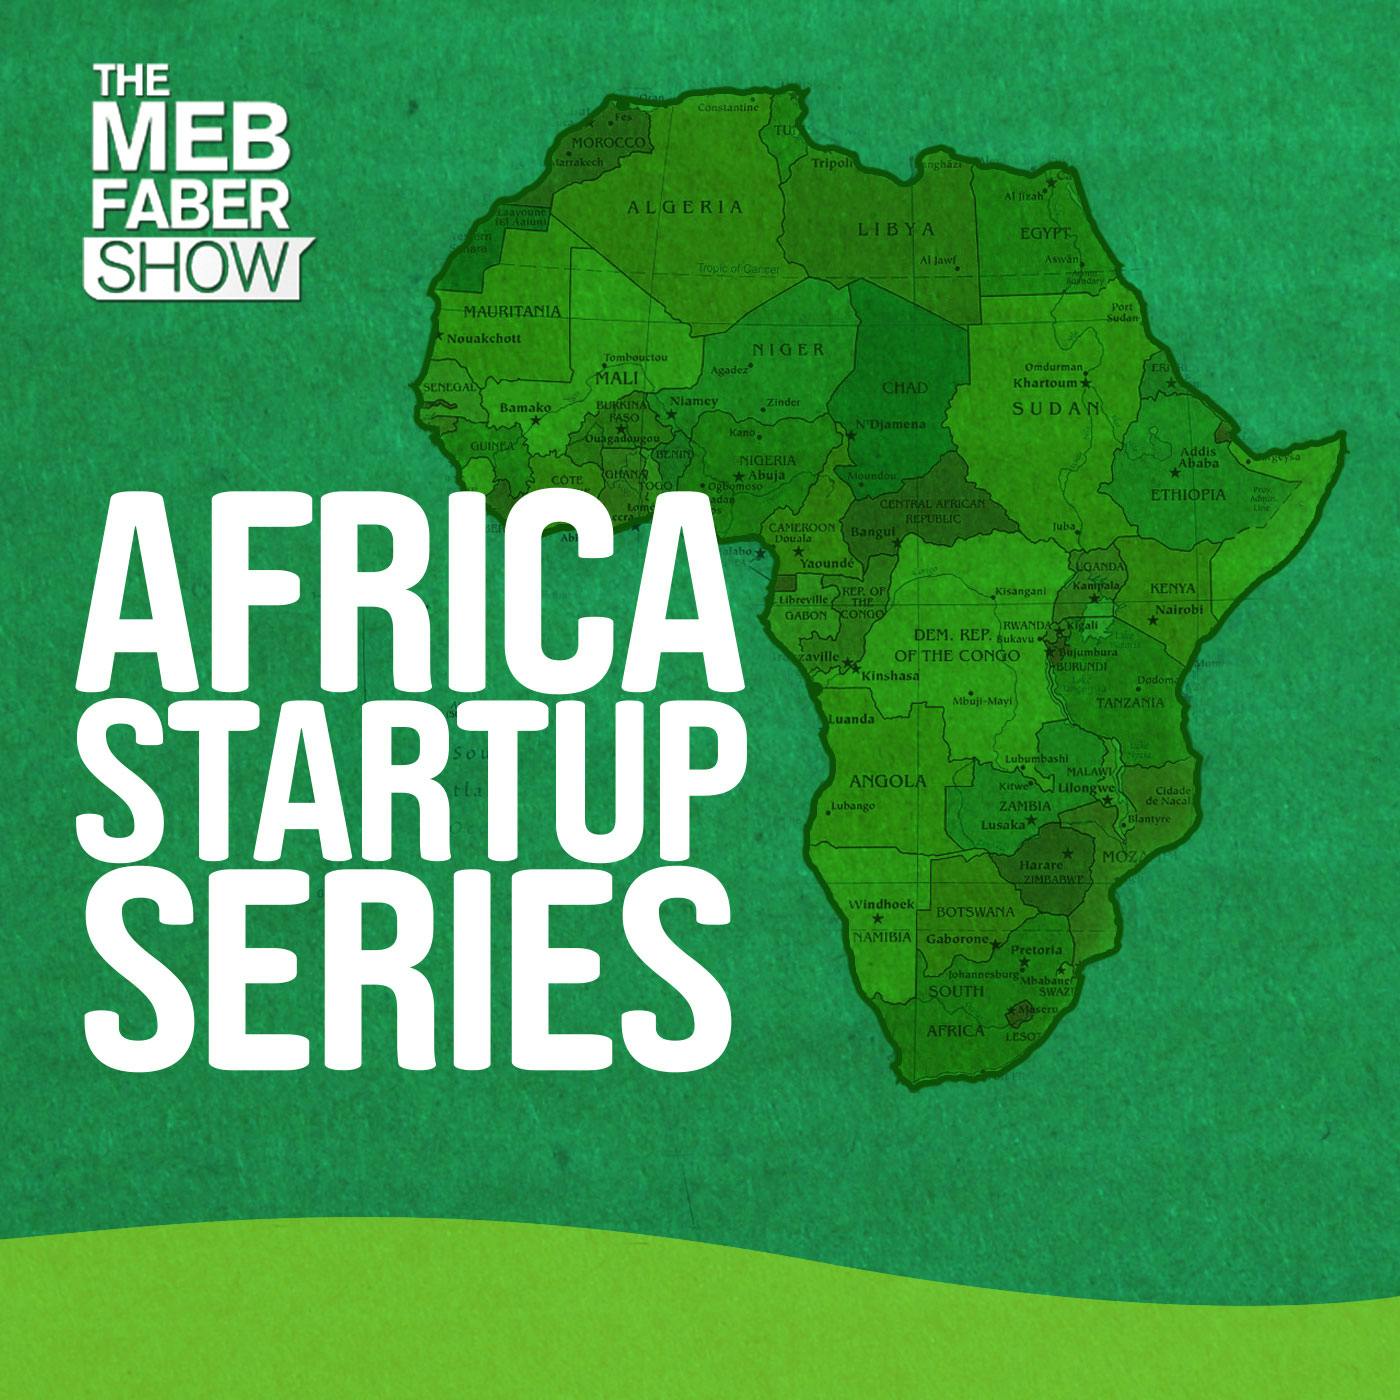 Africa Startup Series – Peter Ngunyi, EarlyBird Venture Lab – Accelerating Africa’s Startup Ecosystem | #394